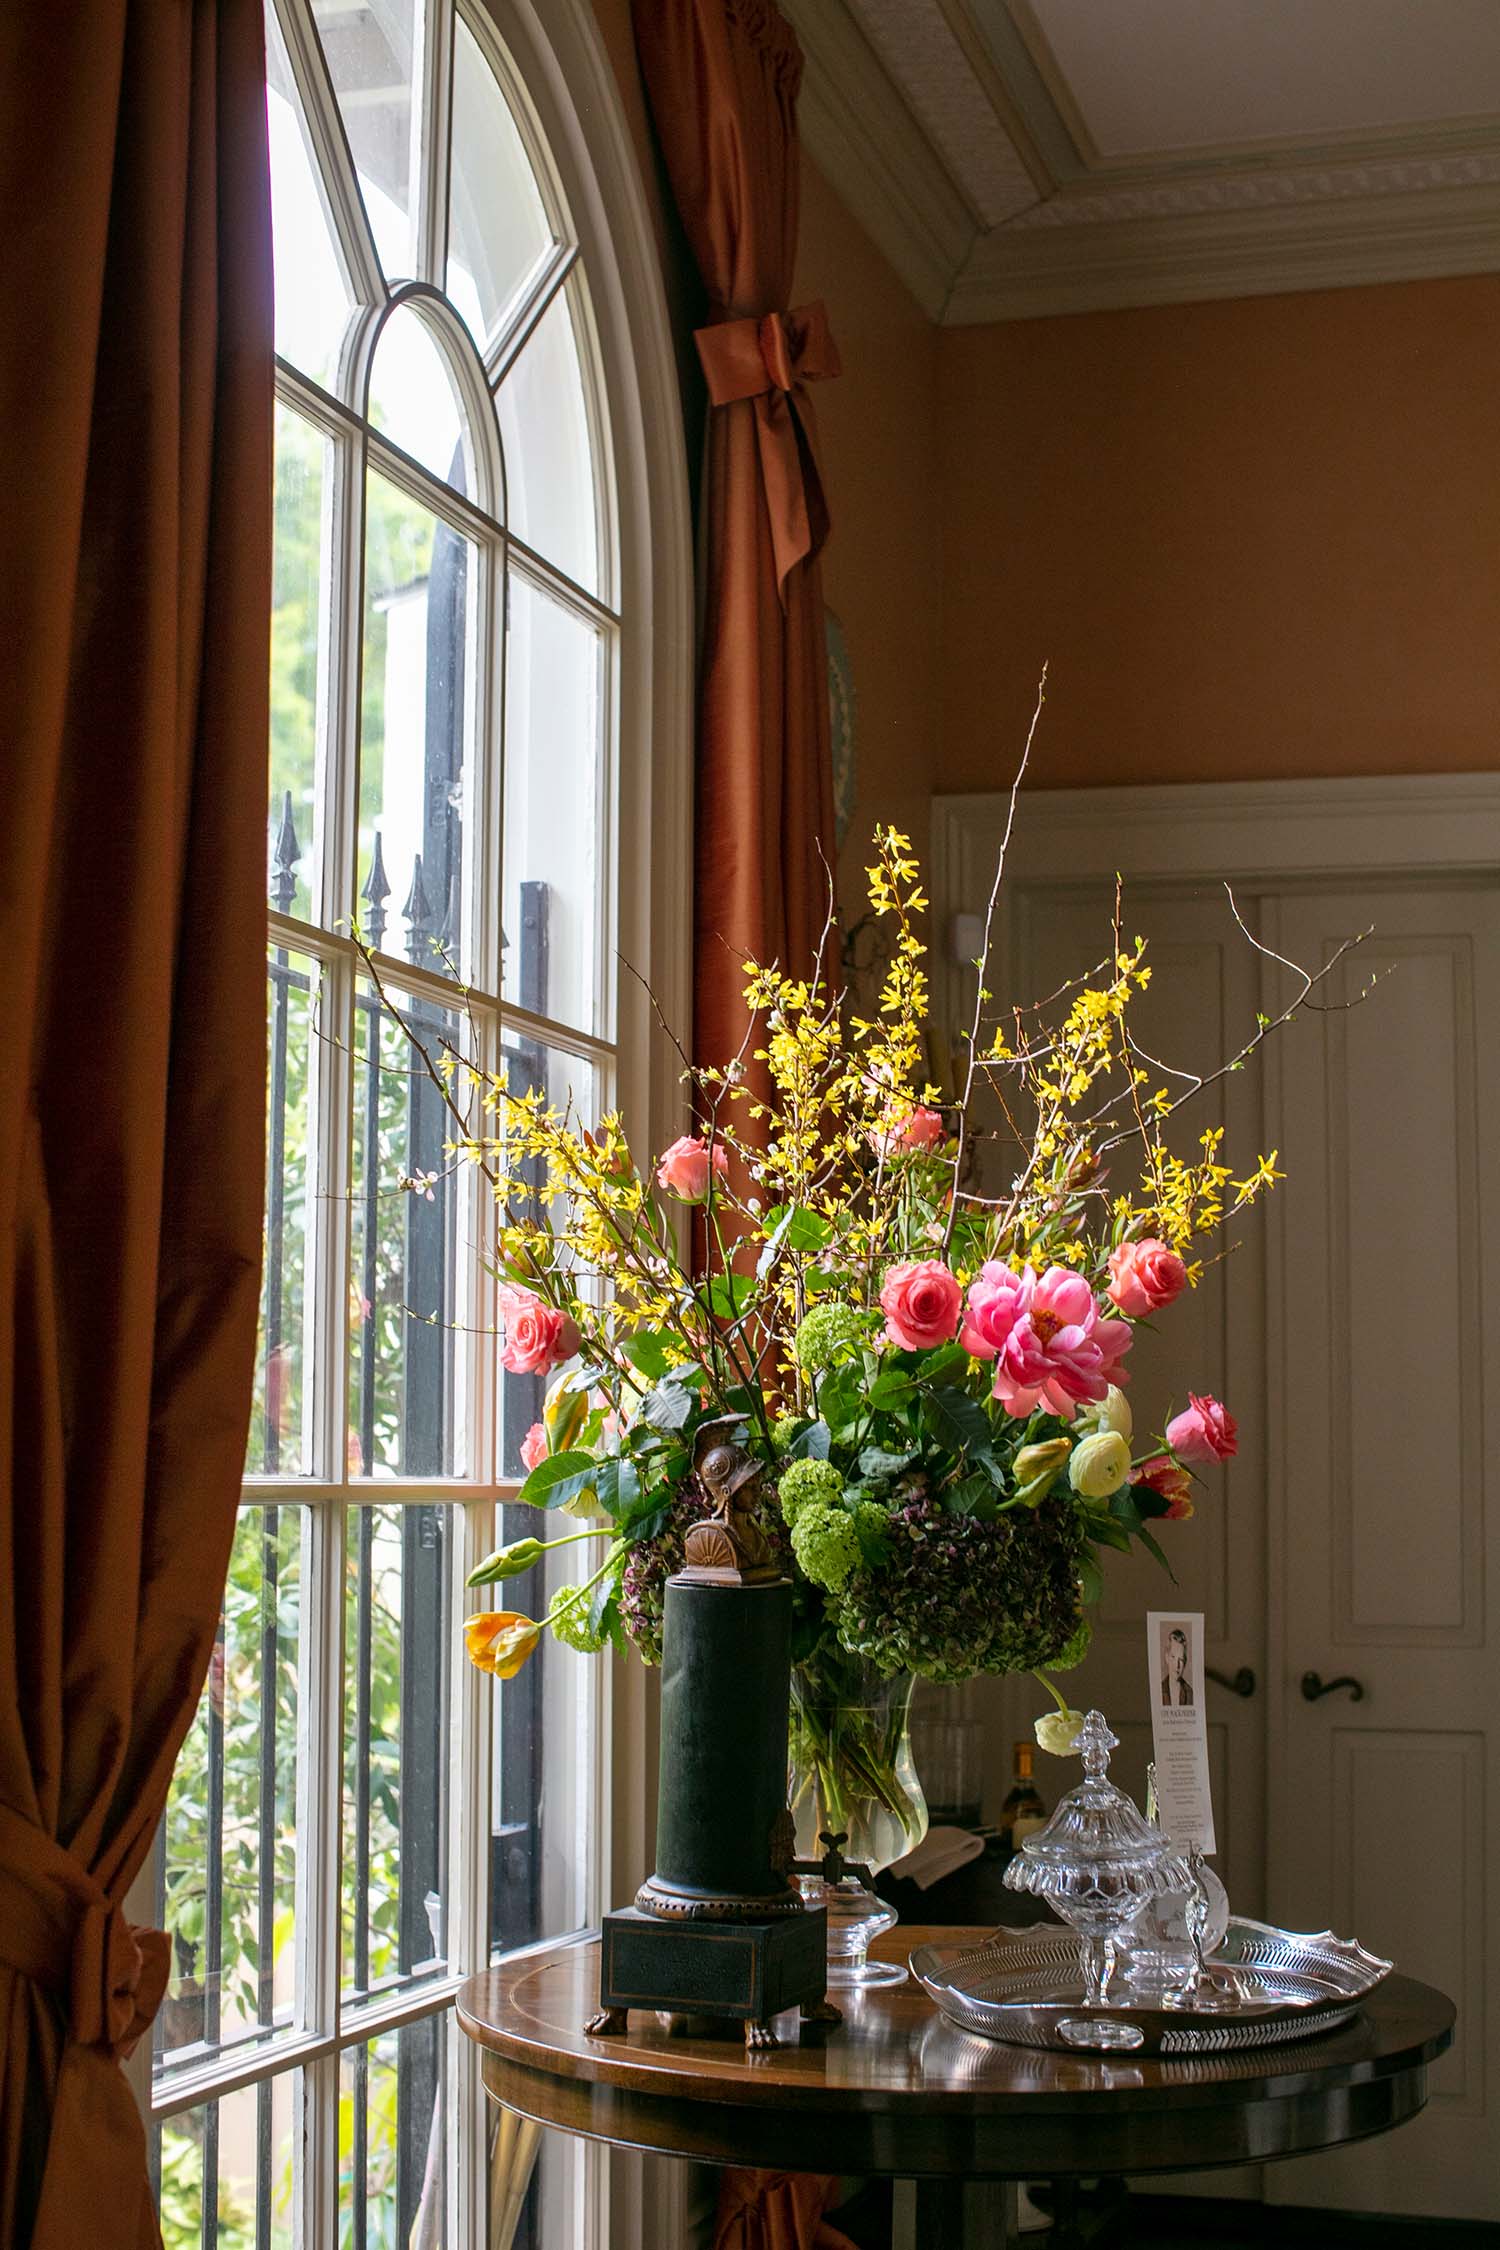 Peonies and forsythia in an arrangement near a window.